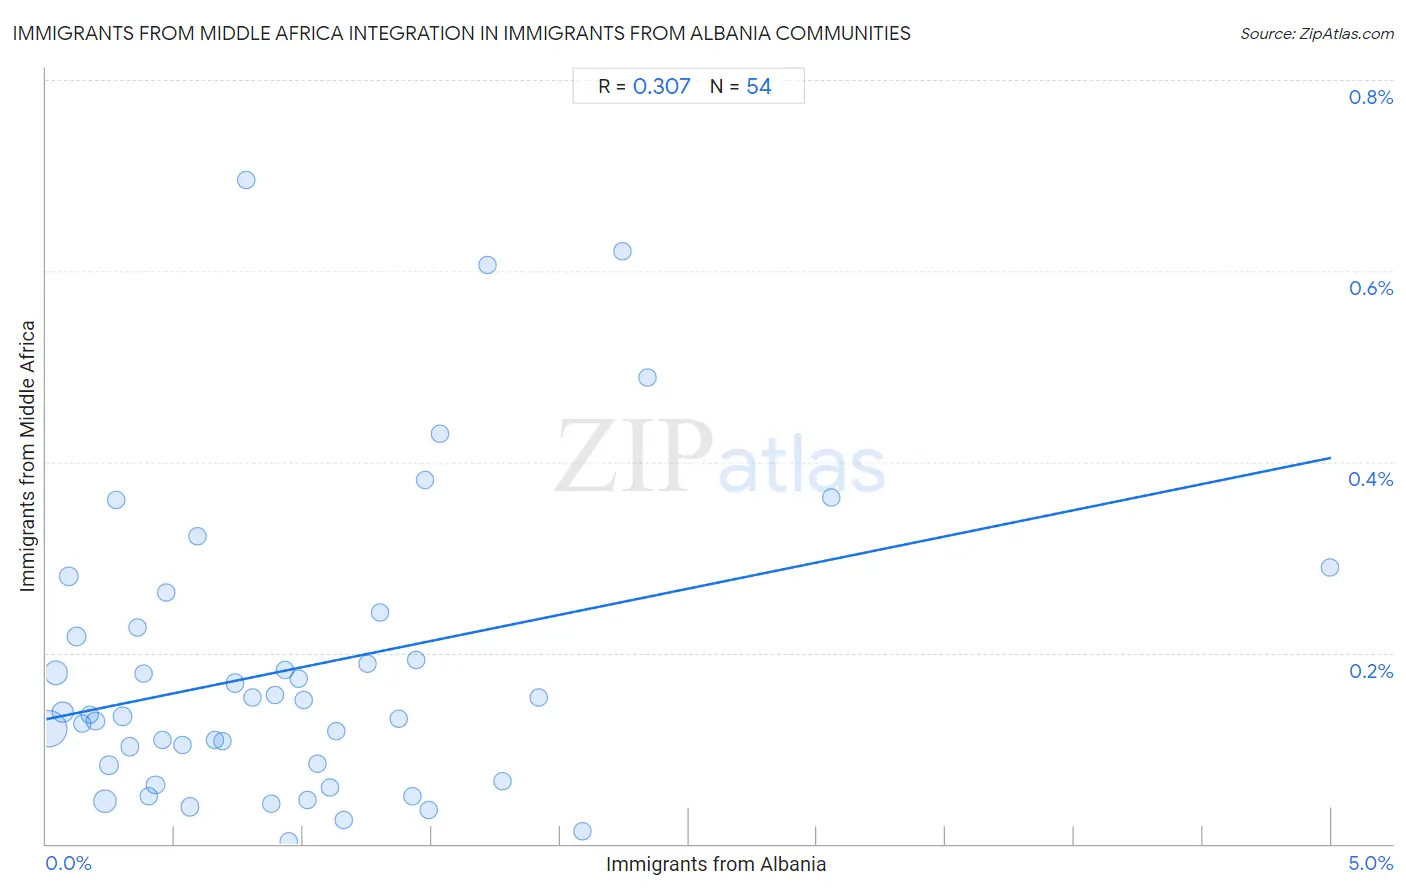 Immigrants from Albania Integration in Immigrants from Middle Africa Communities